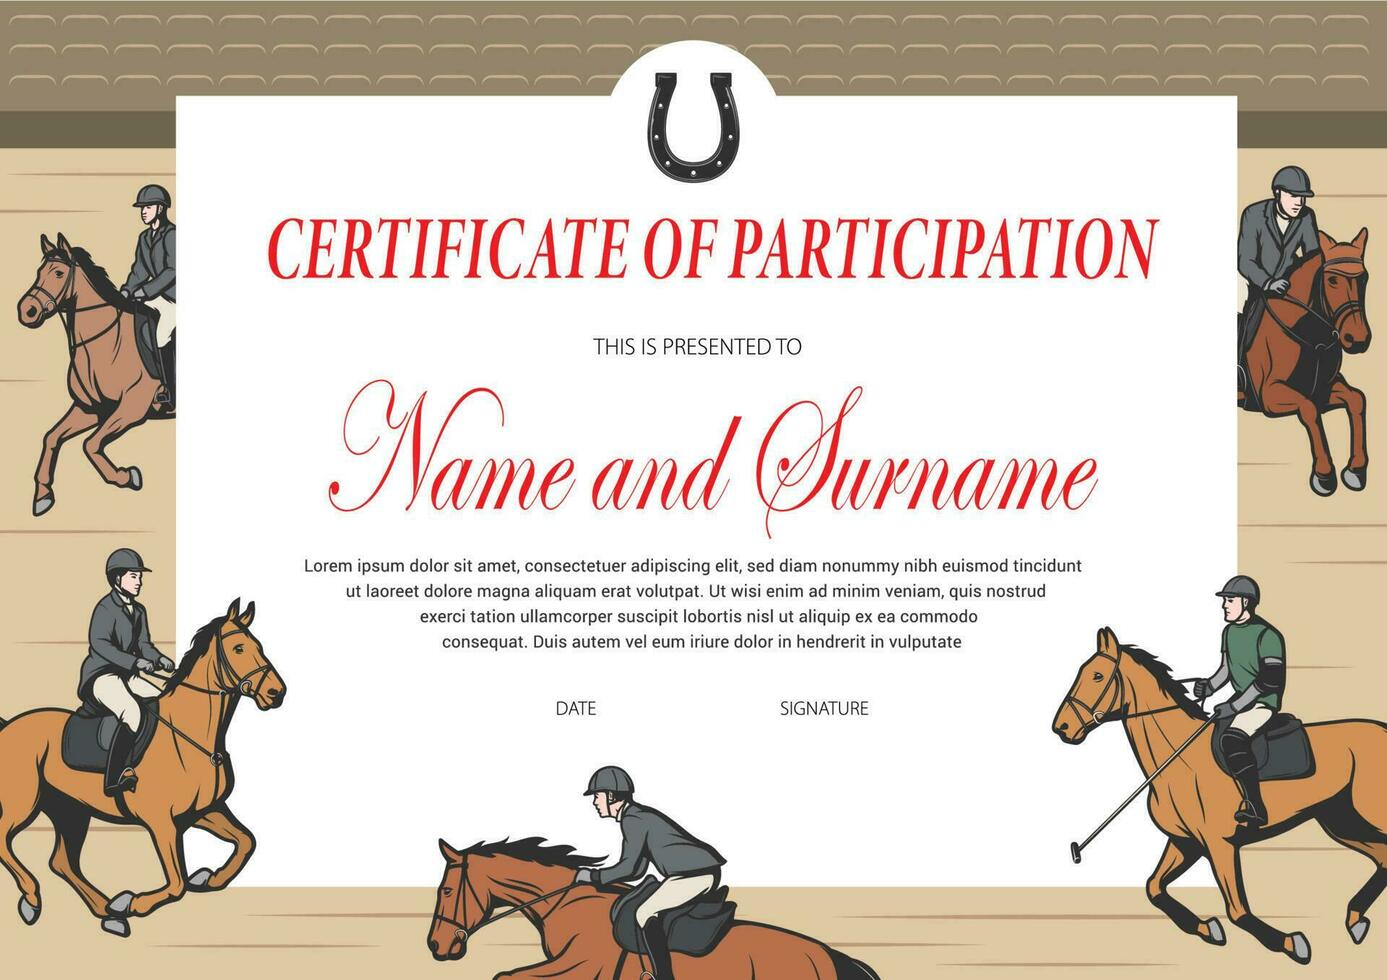 Certificate of participation in horse race diploma vector